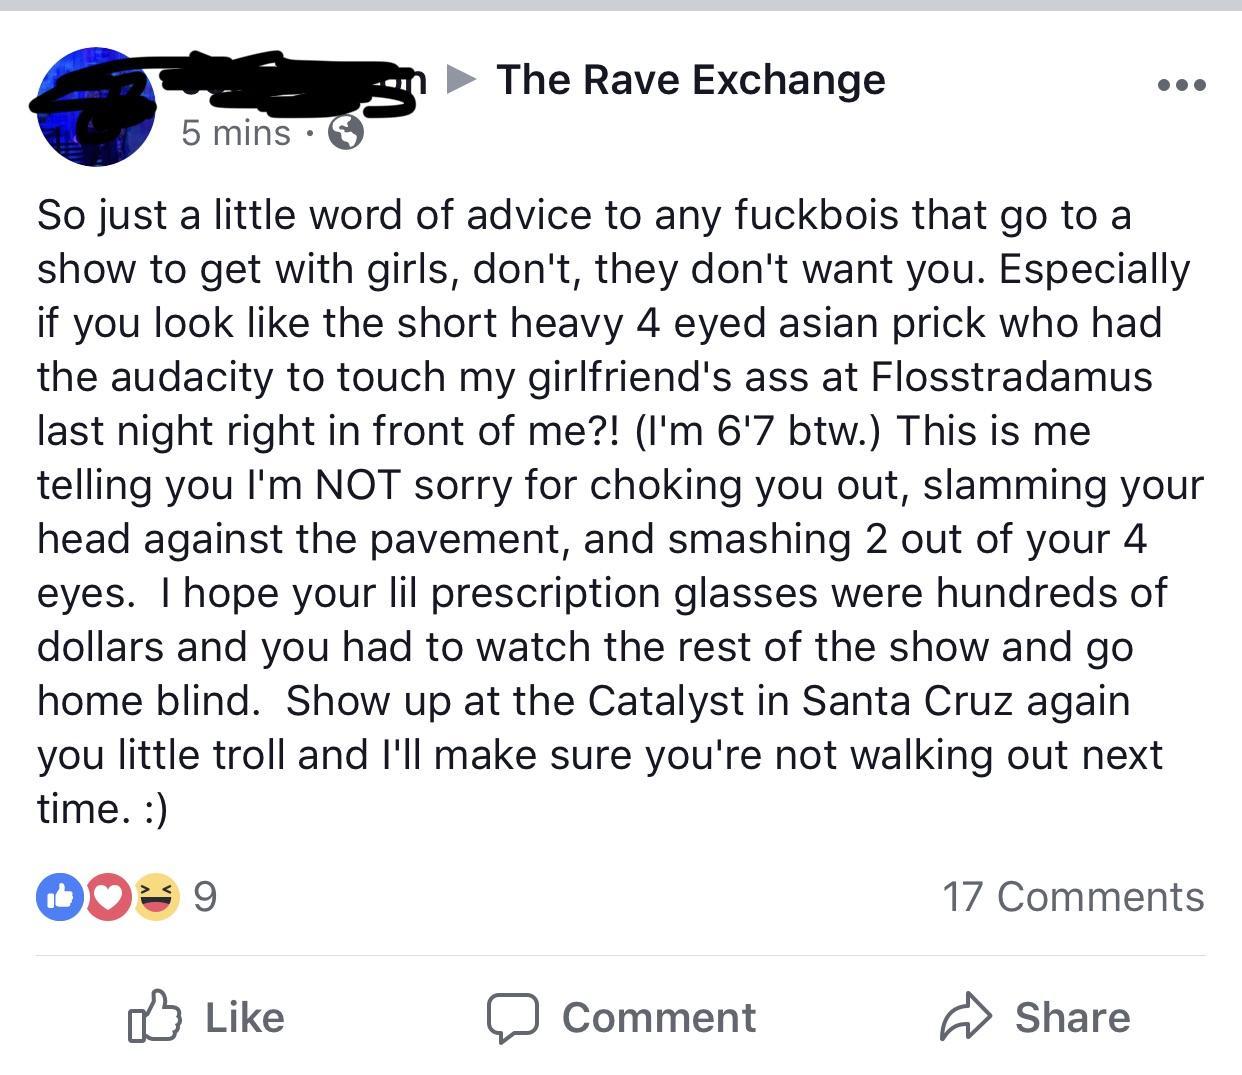 angle - The Rave Exchange 5 mins So just a little word of advice to any fuckbois that go to a show to get with girls, don't, they don't want you. Especially if you look the short heavy 4 eyed asian prick who had the audacity to touch my girlfriend's ass a